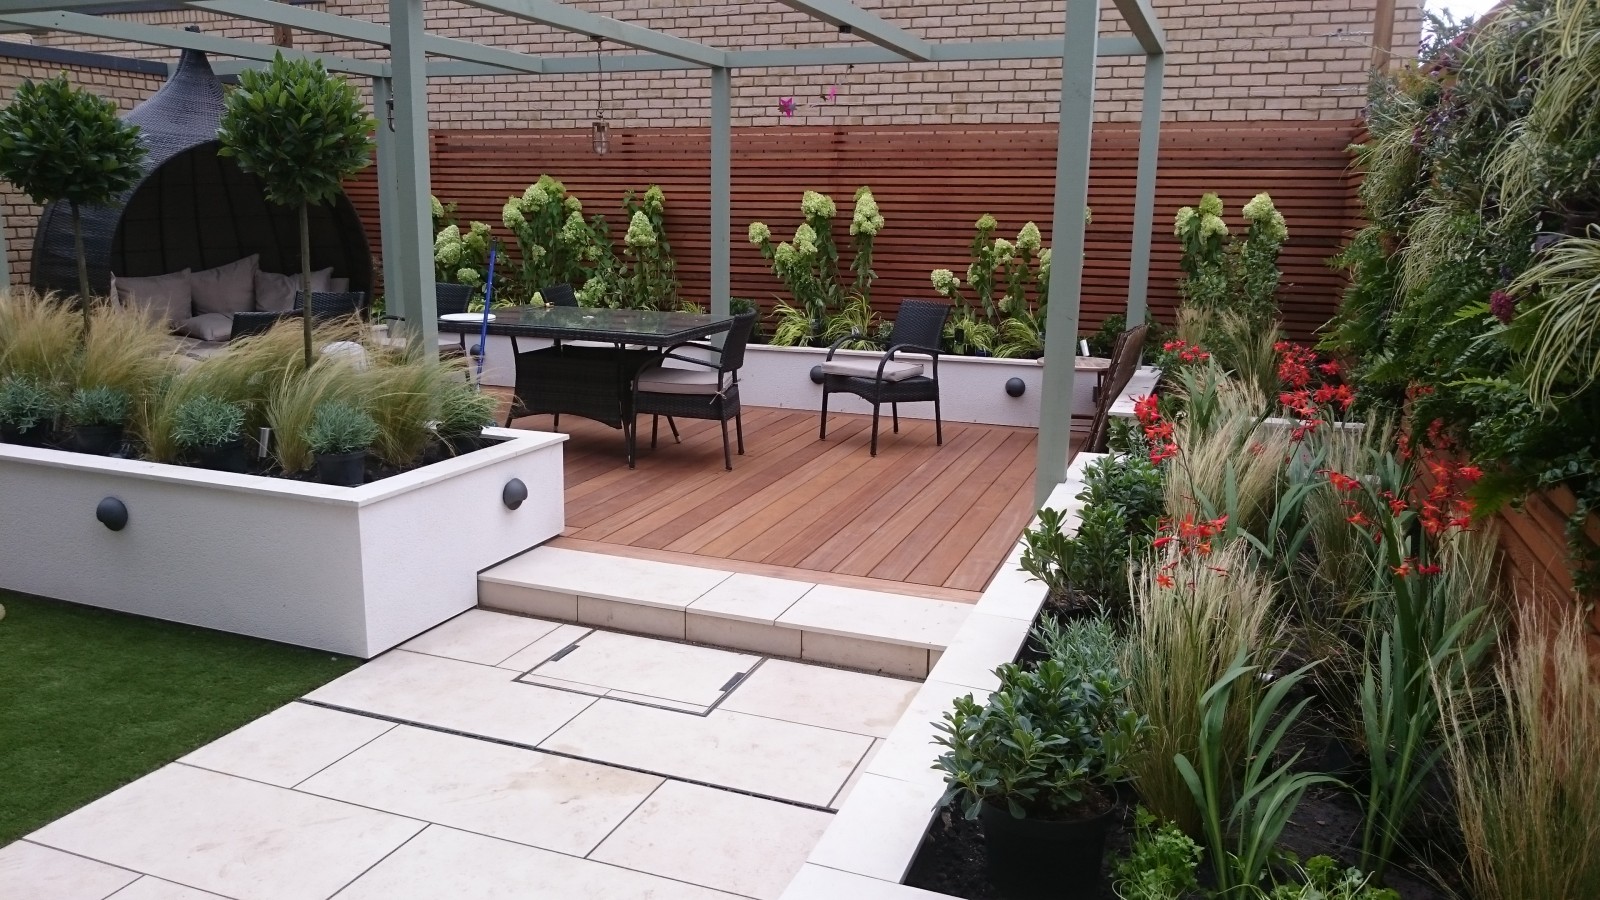 Cambridgshire's Professional Landscaping Services